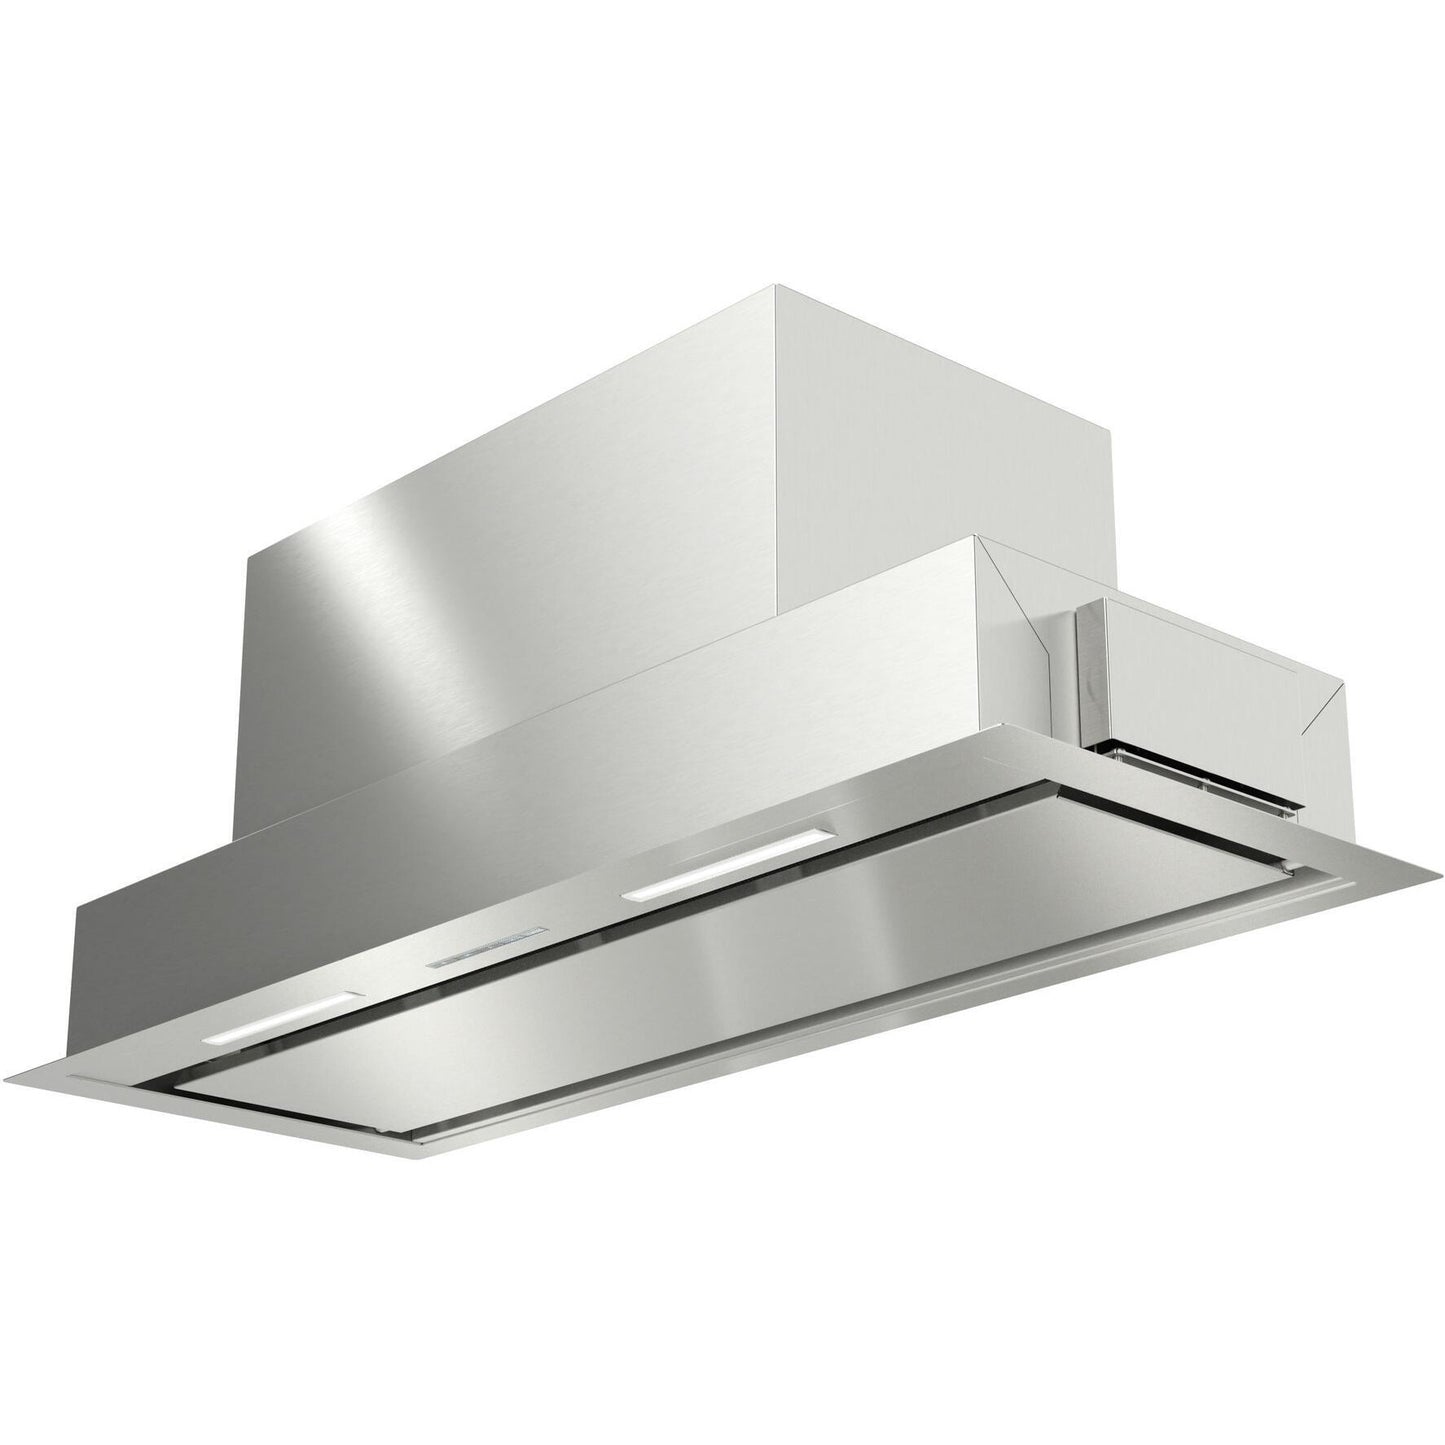 Forte Maya 48" 1100 CFM Convertible Residential Round Duct Stainless Steel Cabinet Insert Range Hood With LED Bar Lighting